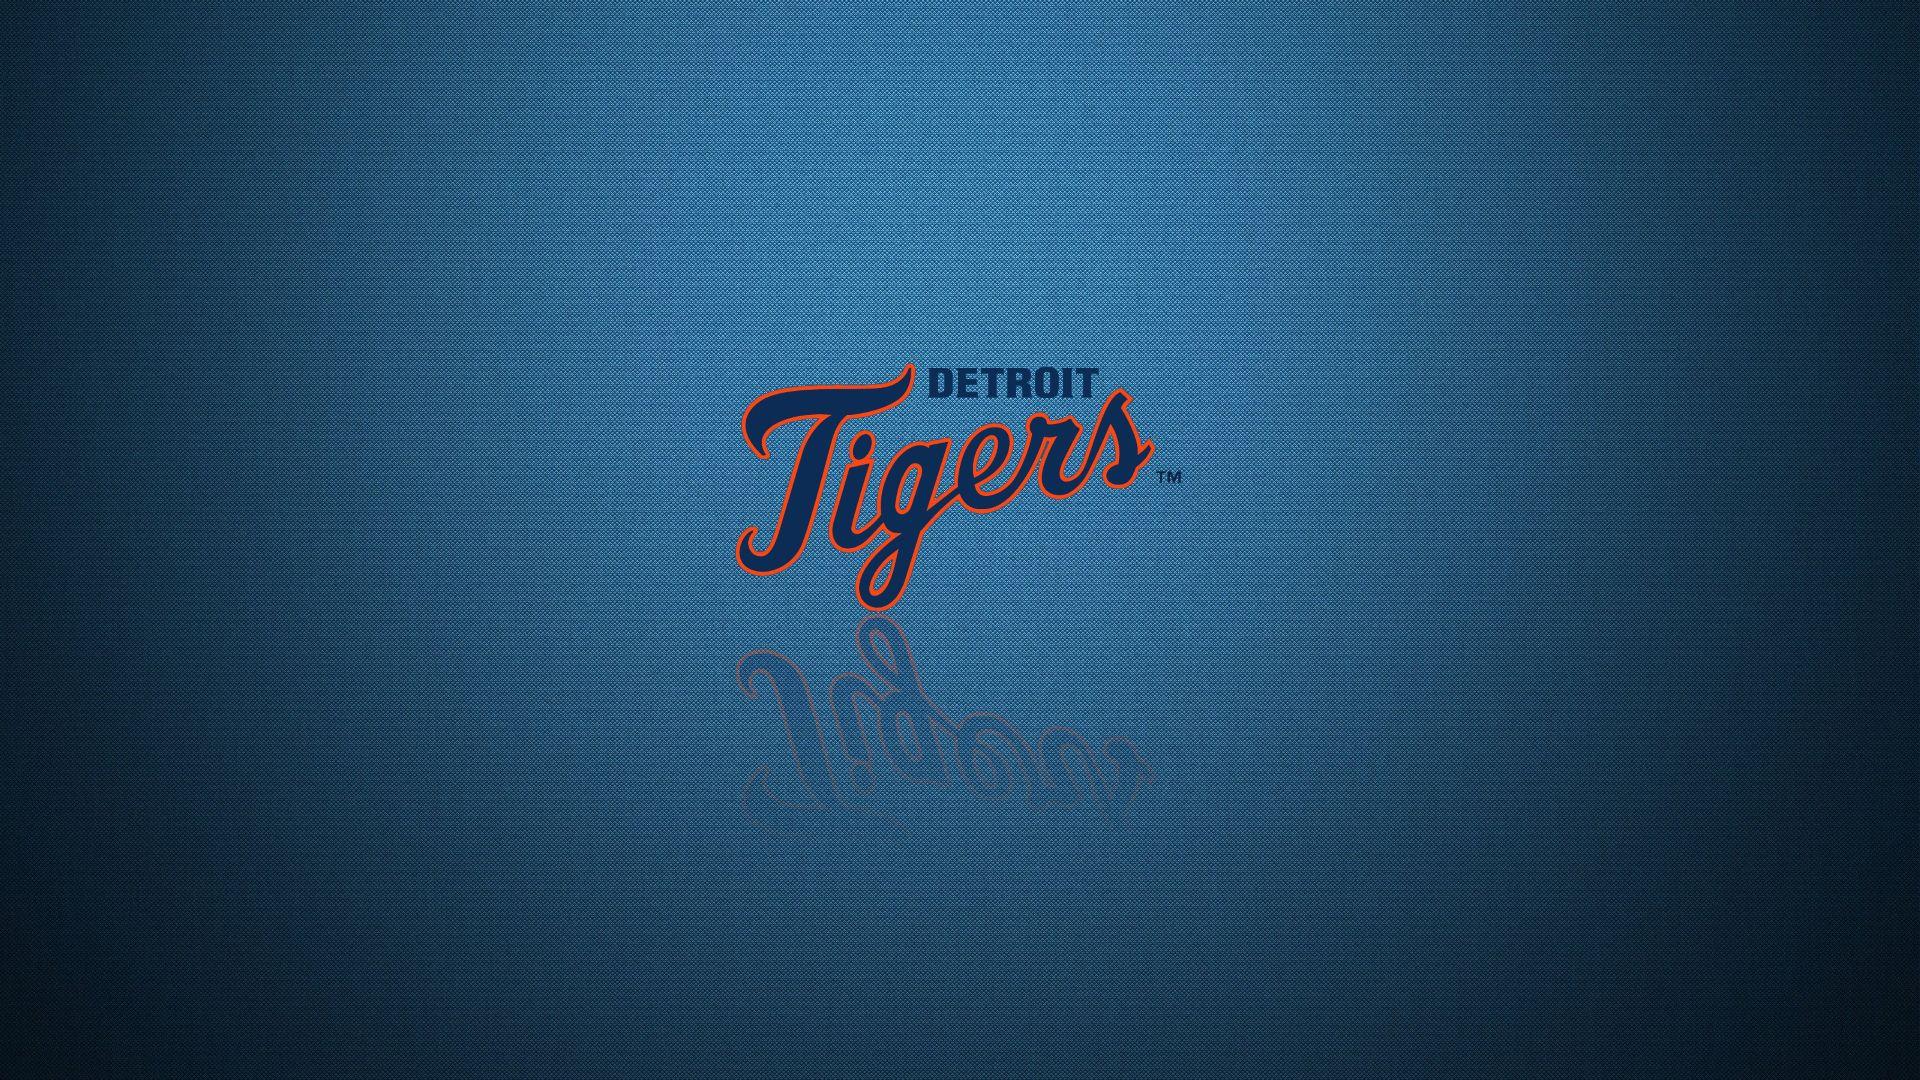 Detroit Tigers wallpaper by neuor - Download on ZEDGE™